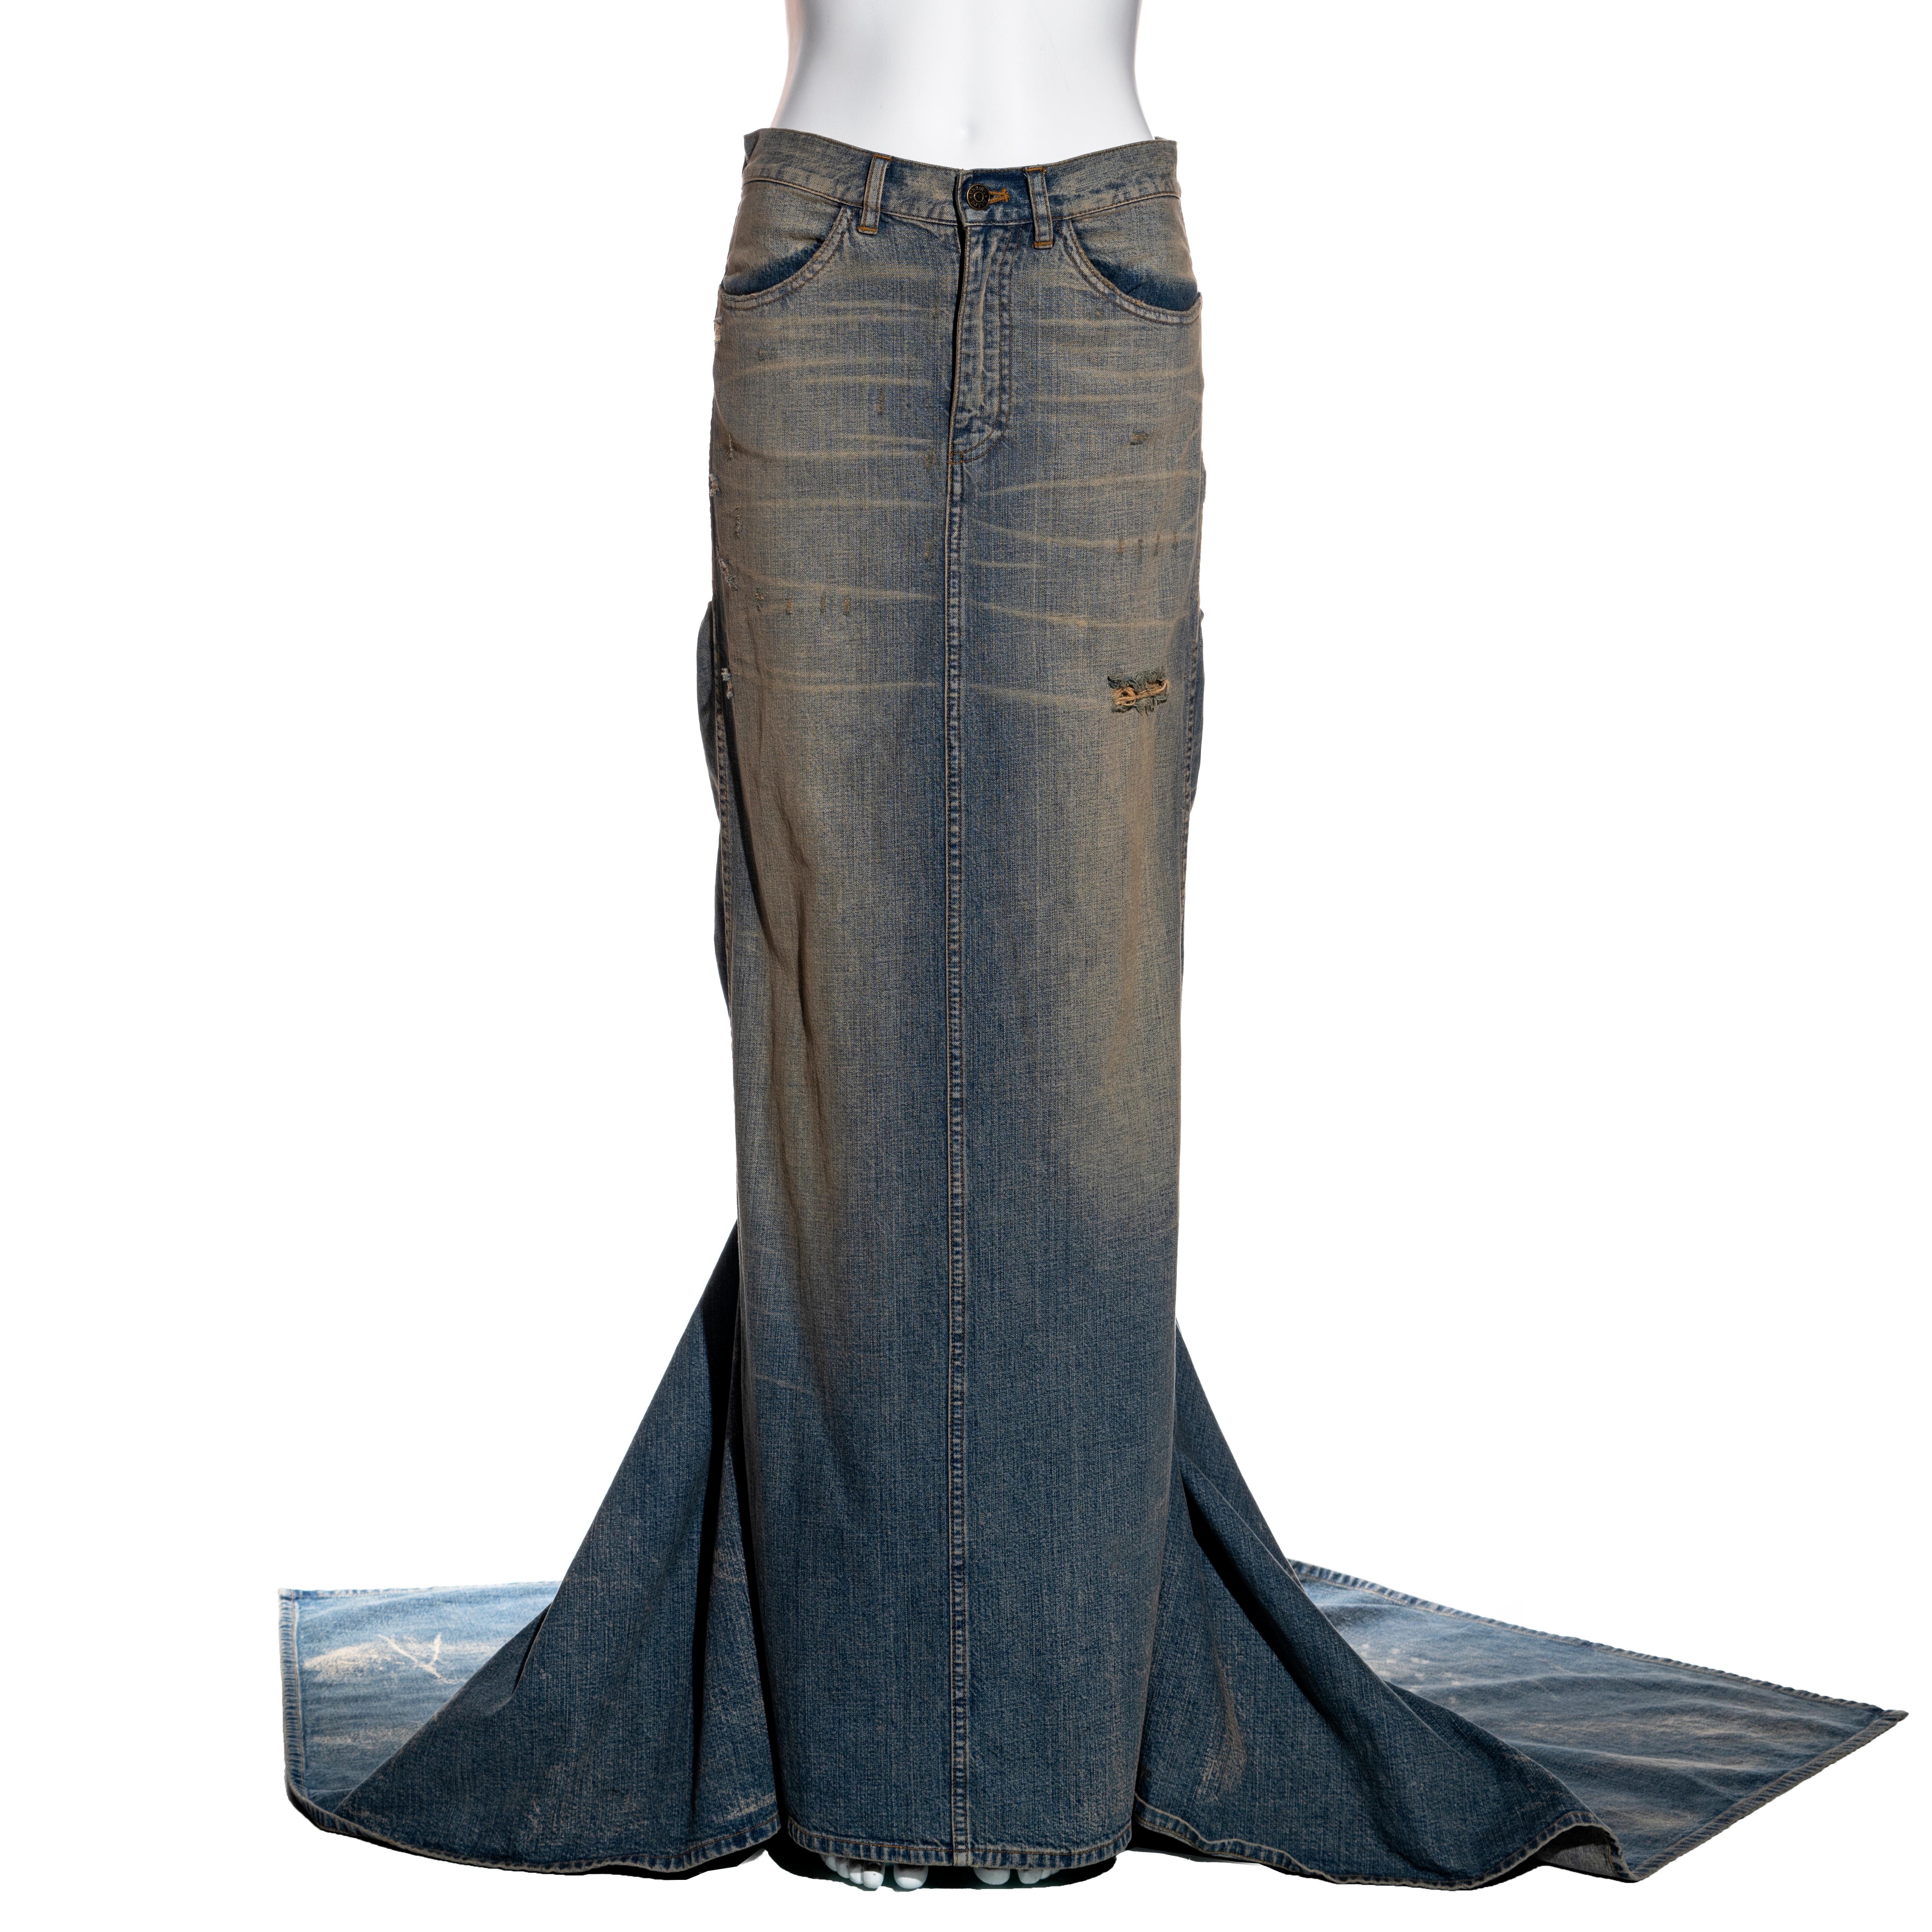 ▪ Ralph Lauren floor-length denim skirt
▪ Distressed sandwashed denim 
▪ Low-rise
▪ 2 pointed trains which can be buttoned to make a bustle 
▪ Size Medium
▪ Spring-Summer 2003
▪ 100% Cotton
▪ Made in Italy